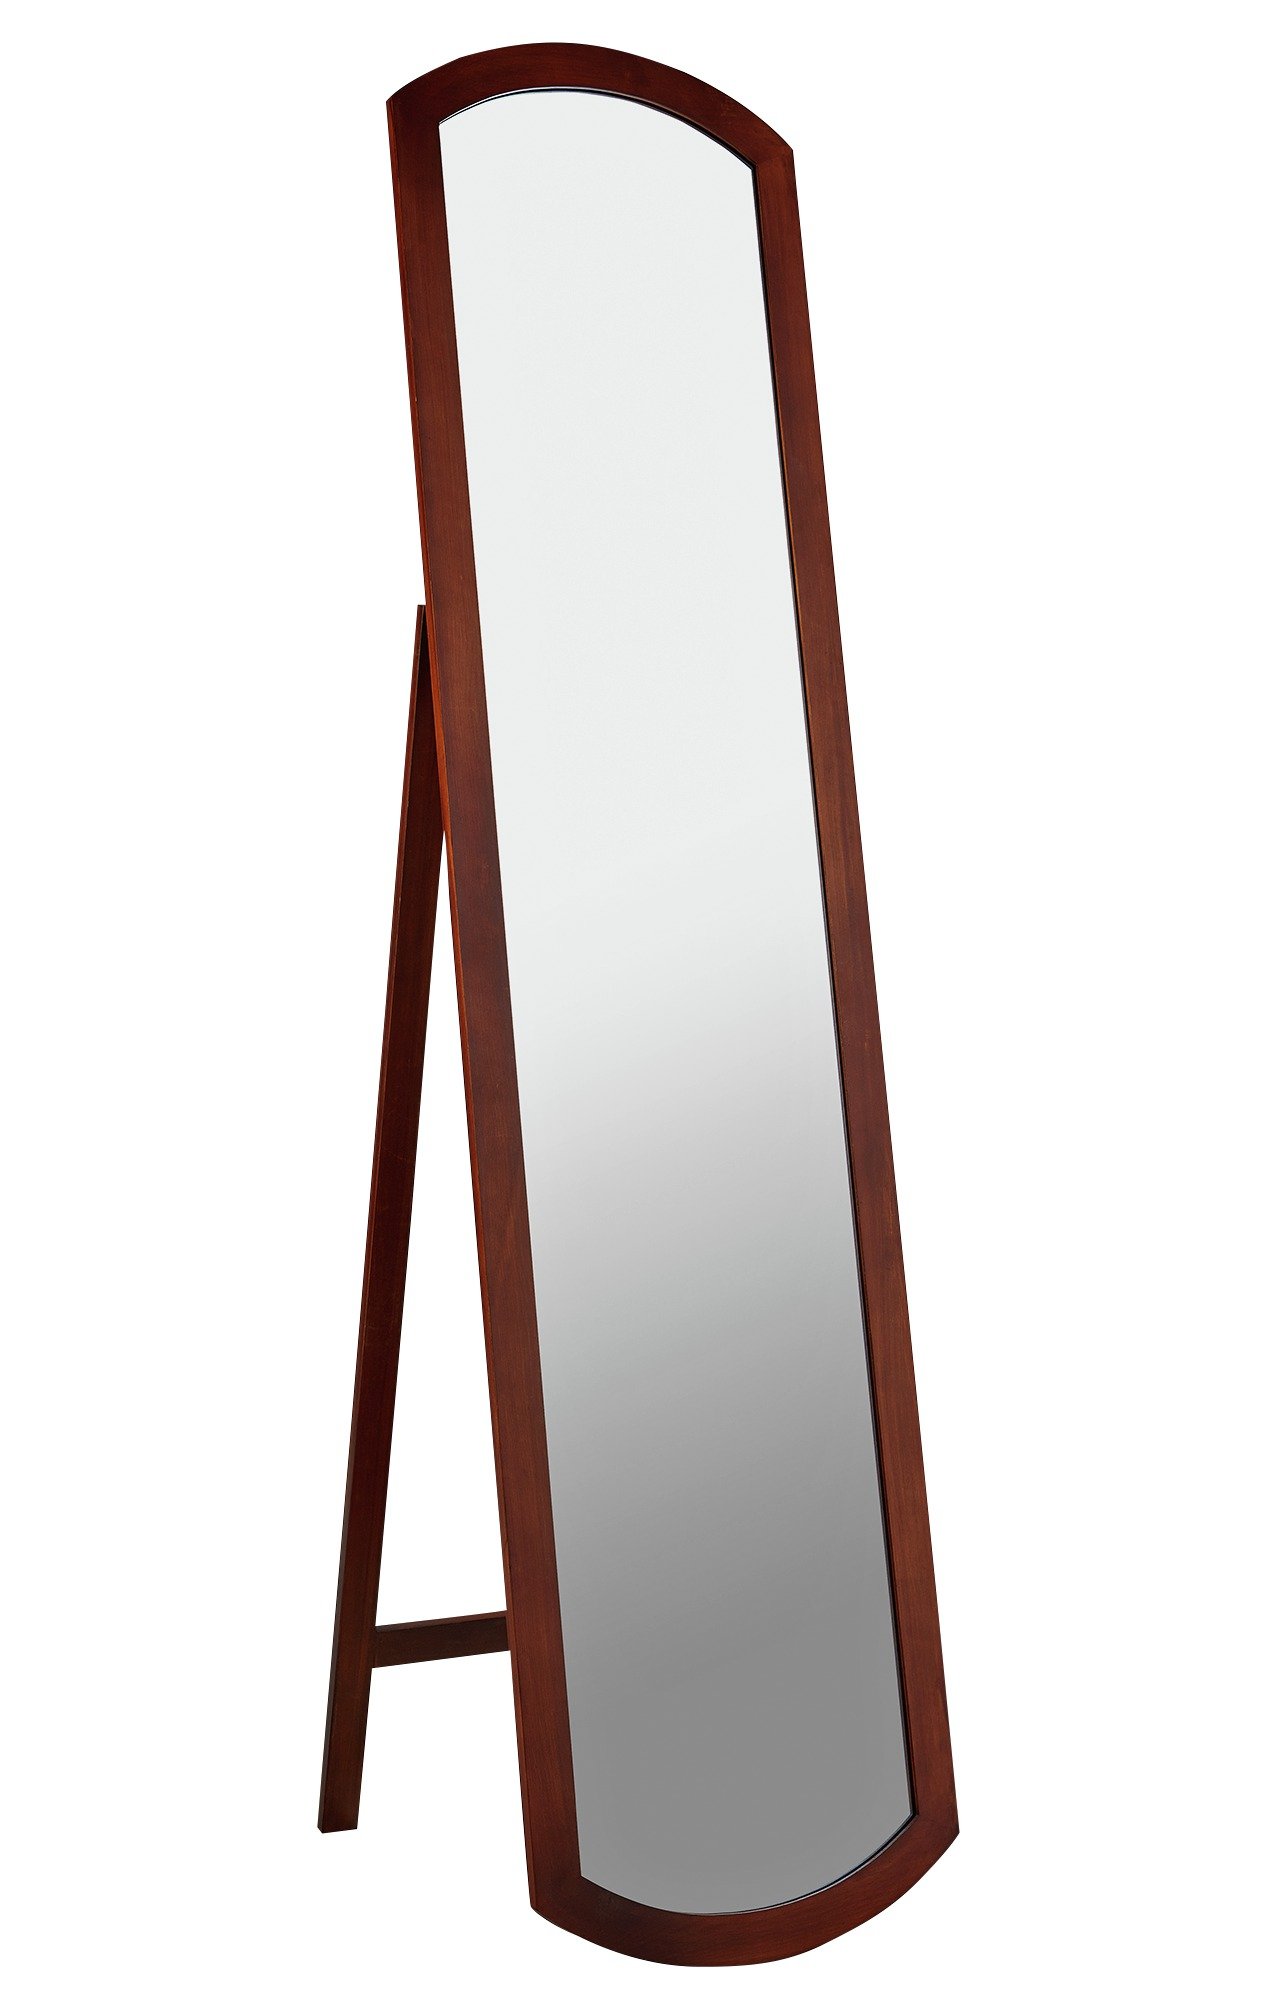 Collection Full Length Wooden Cheval Mirror - Walnut